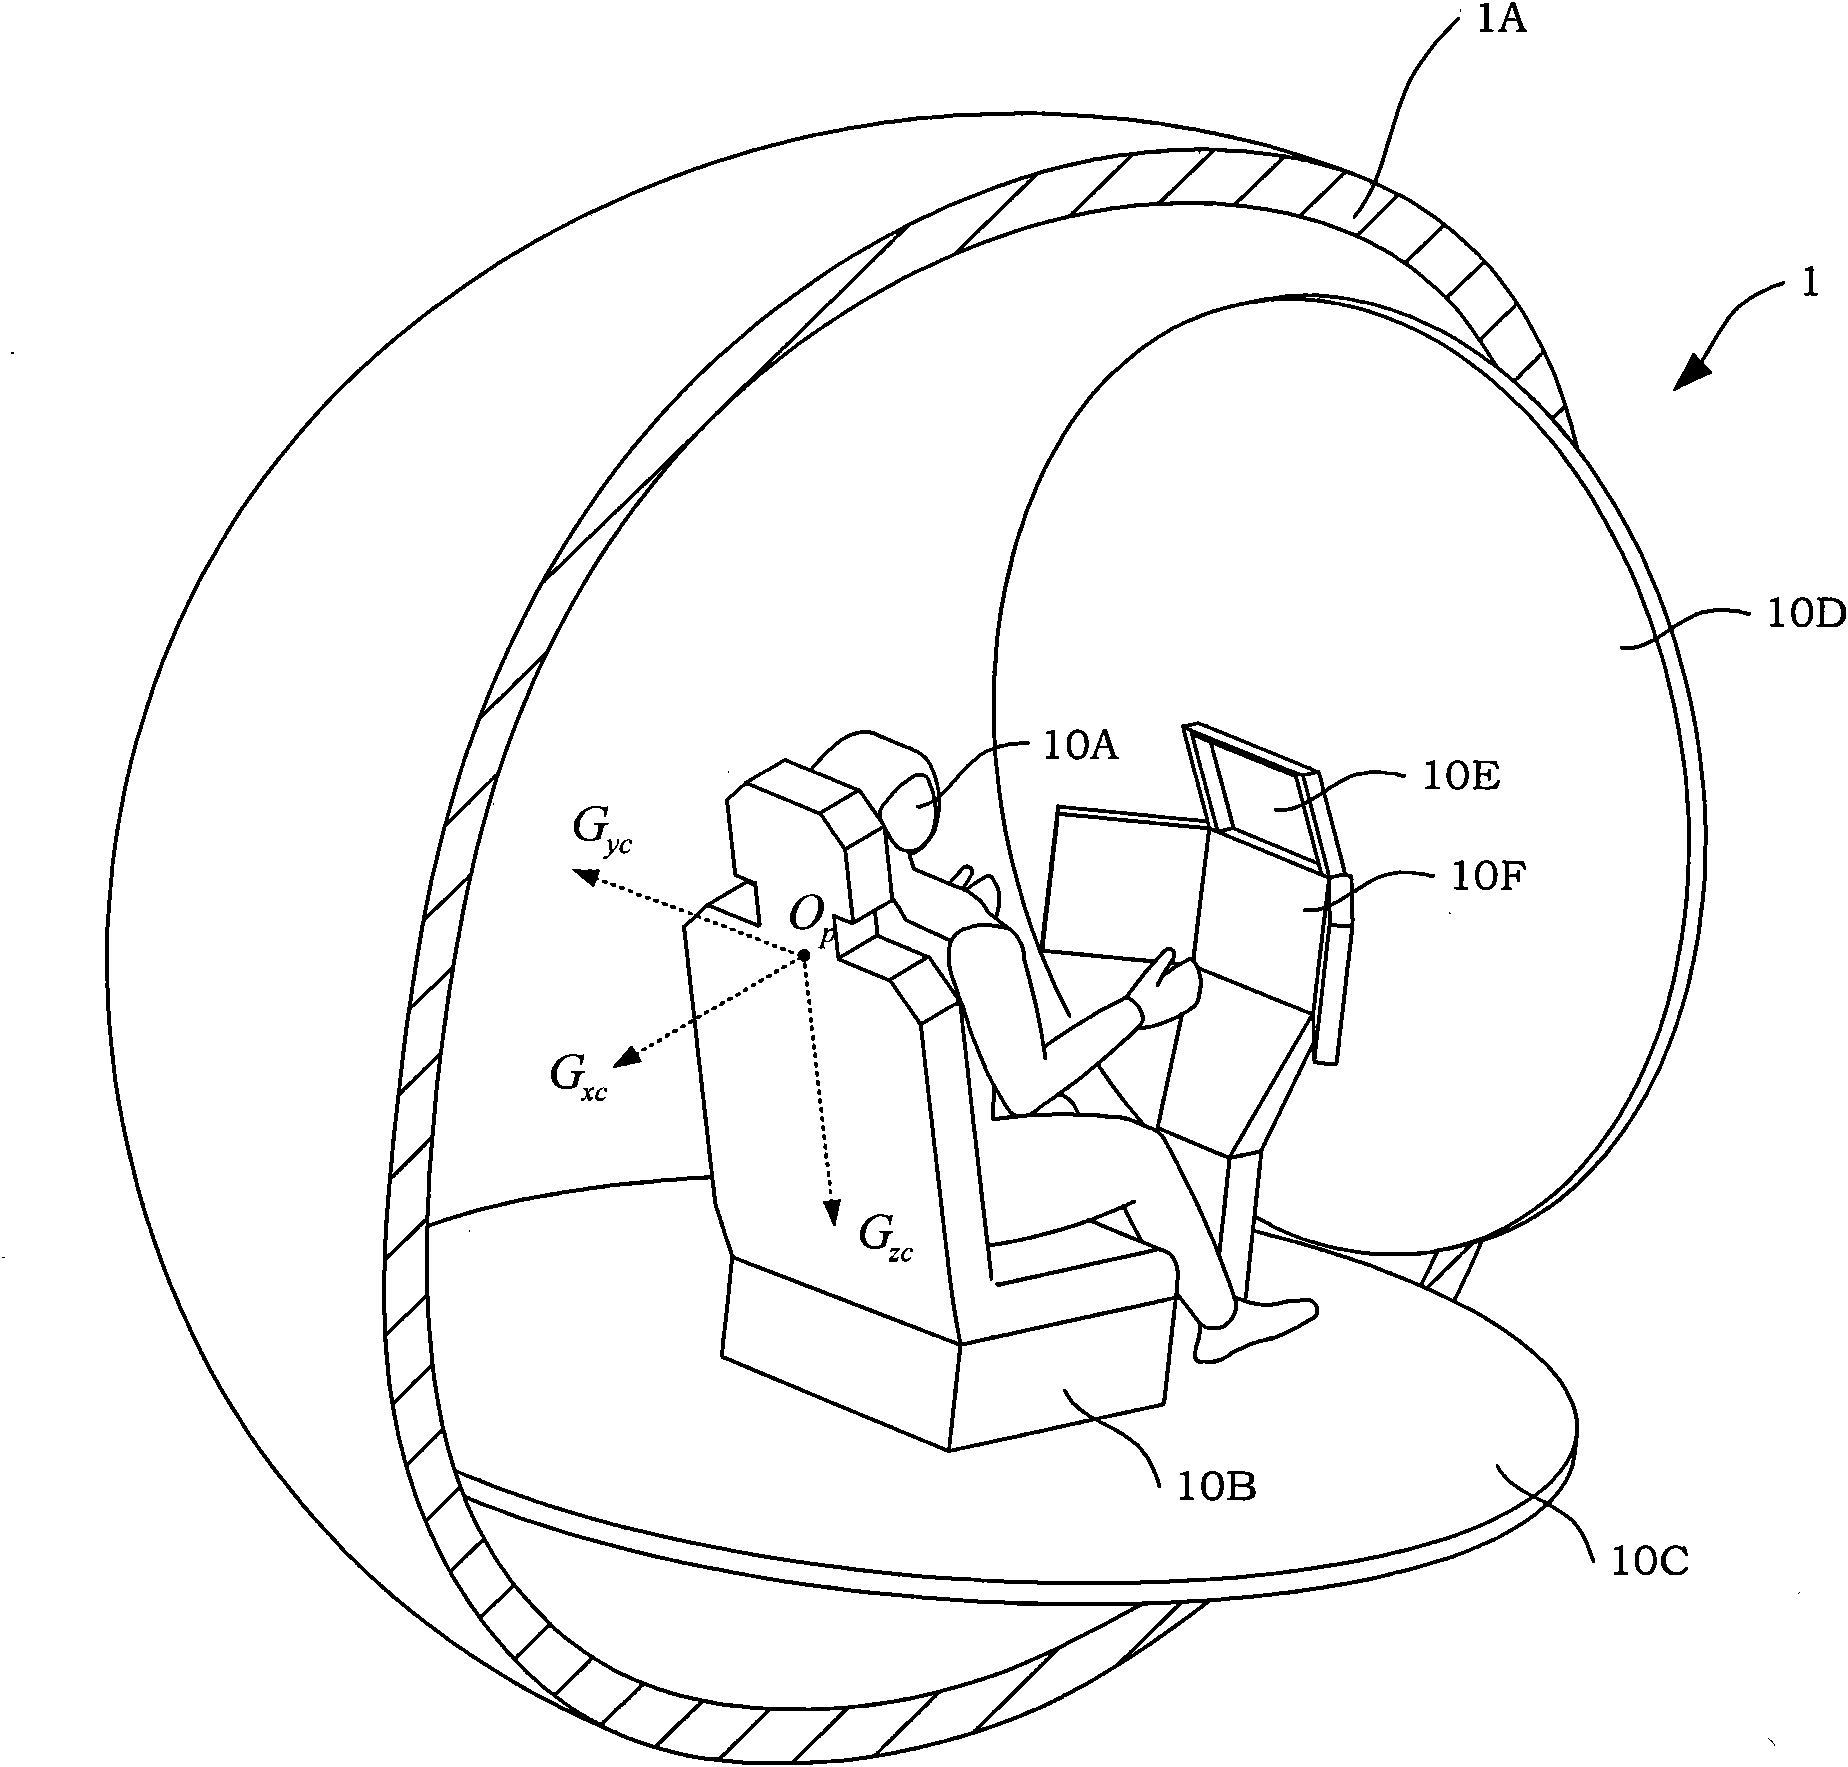 Flight simulator system with persistent overload simulation capability